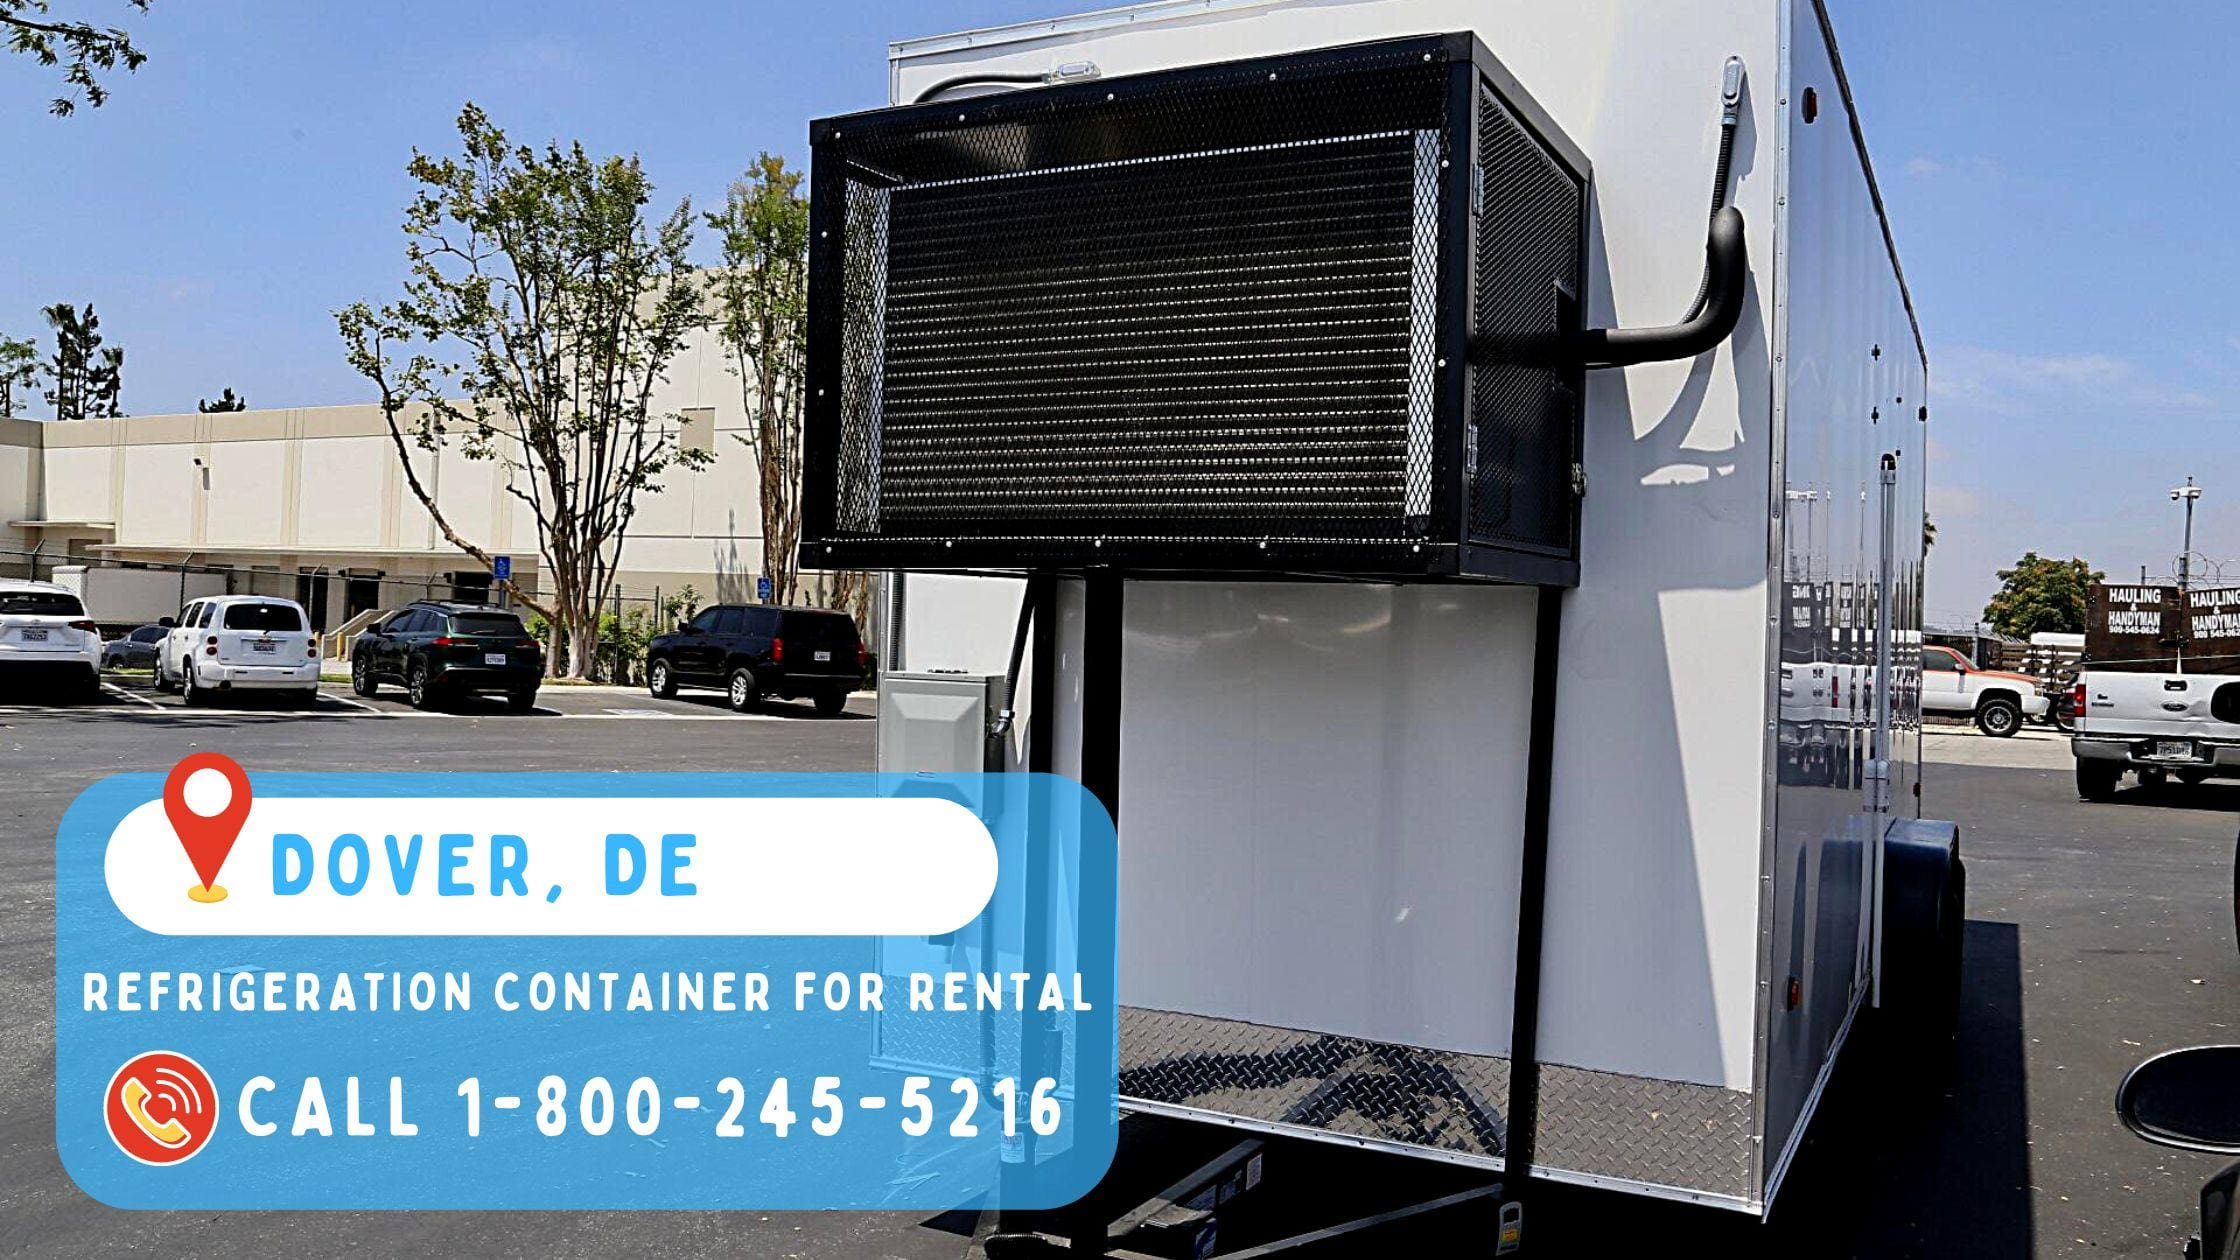 Refrigeration Container for rental Dover